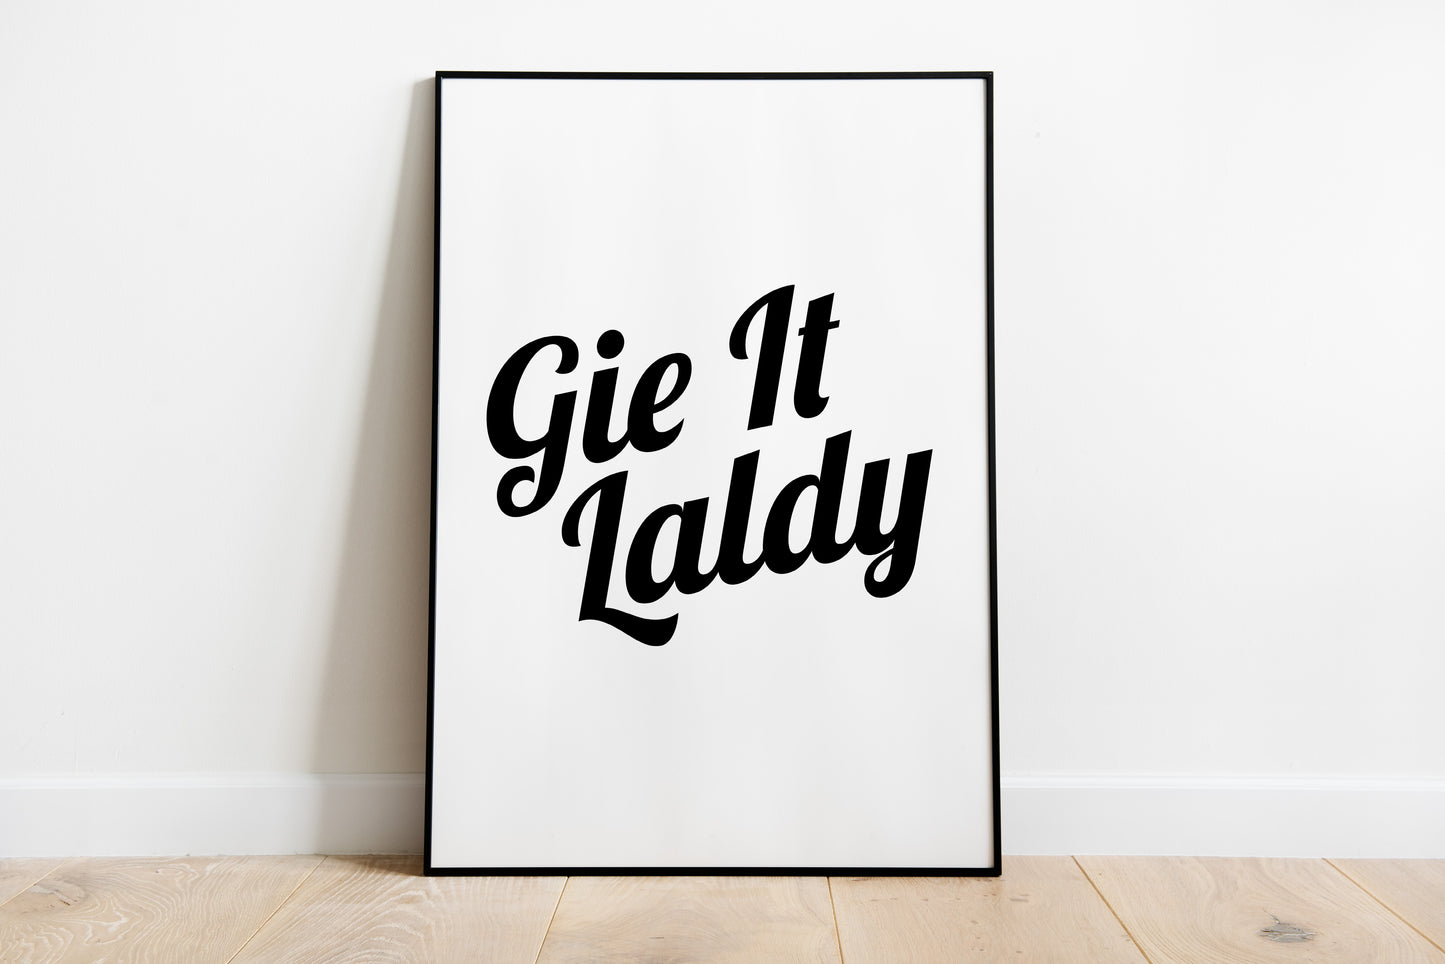 "Gie It Laldy" (Colourful)